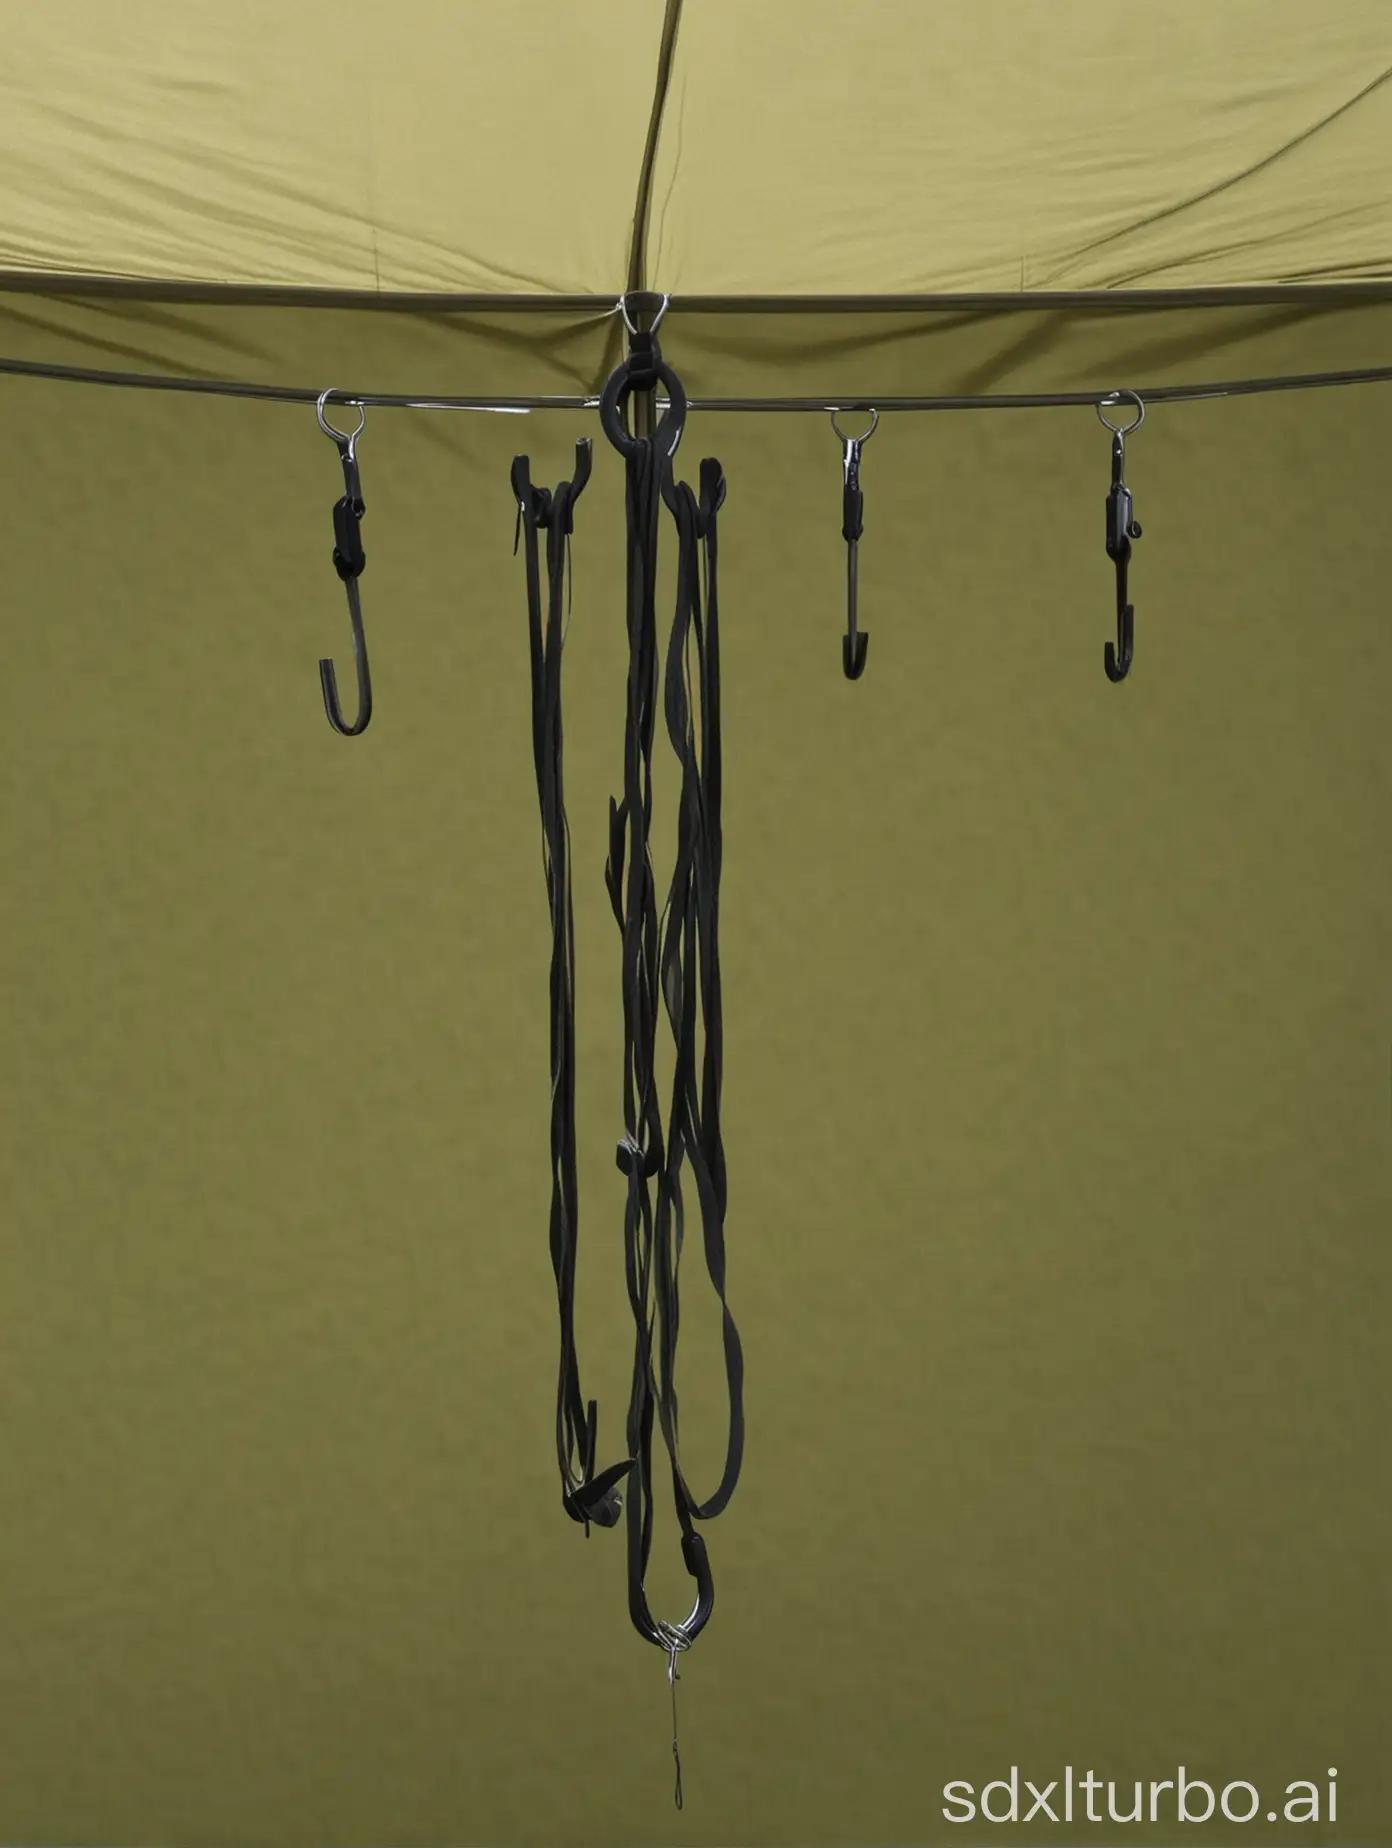 The tent has hooks